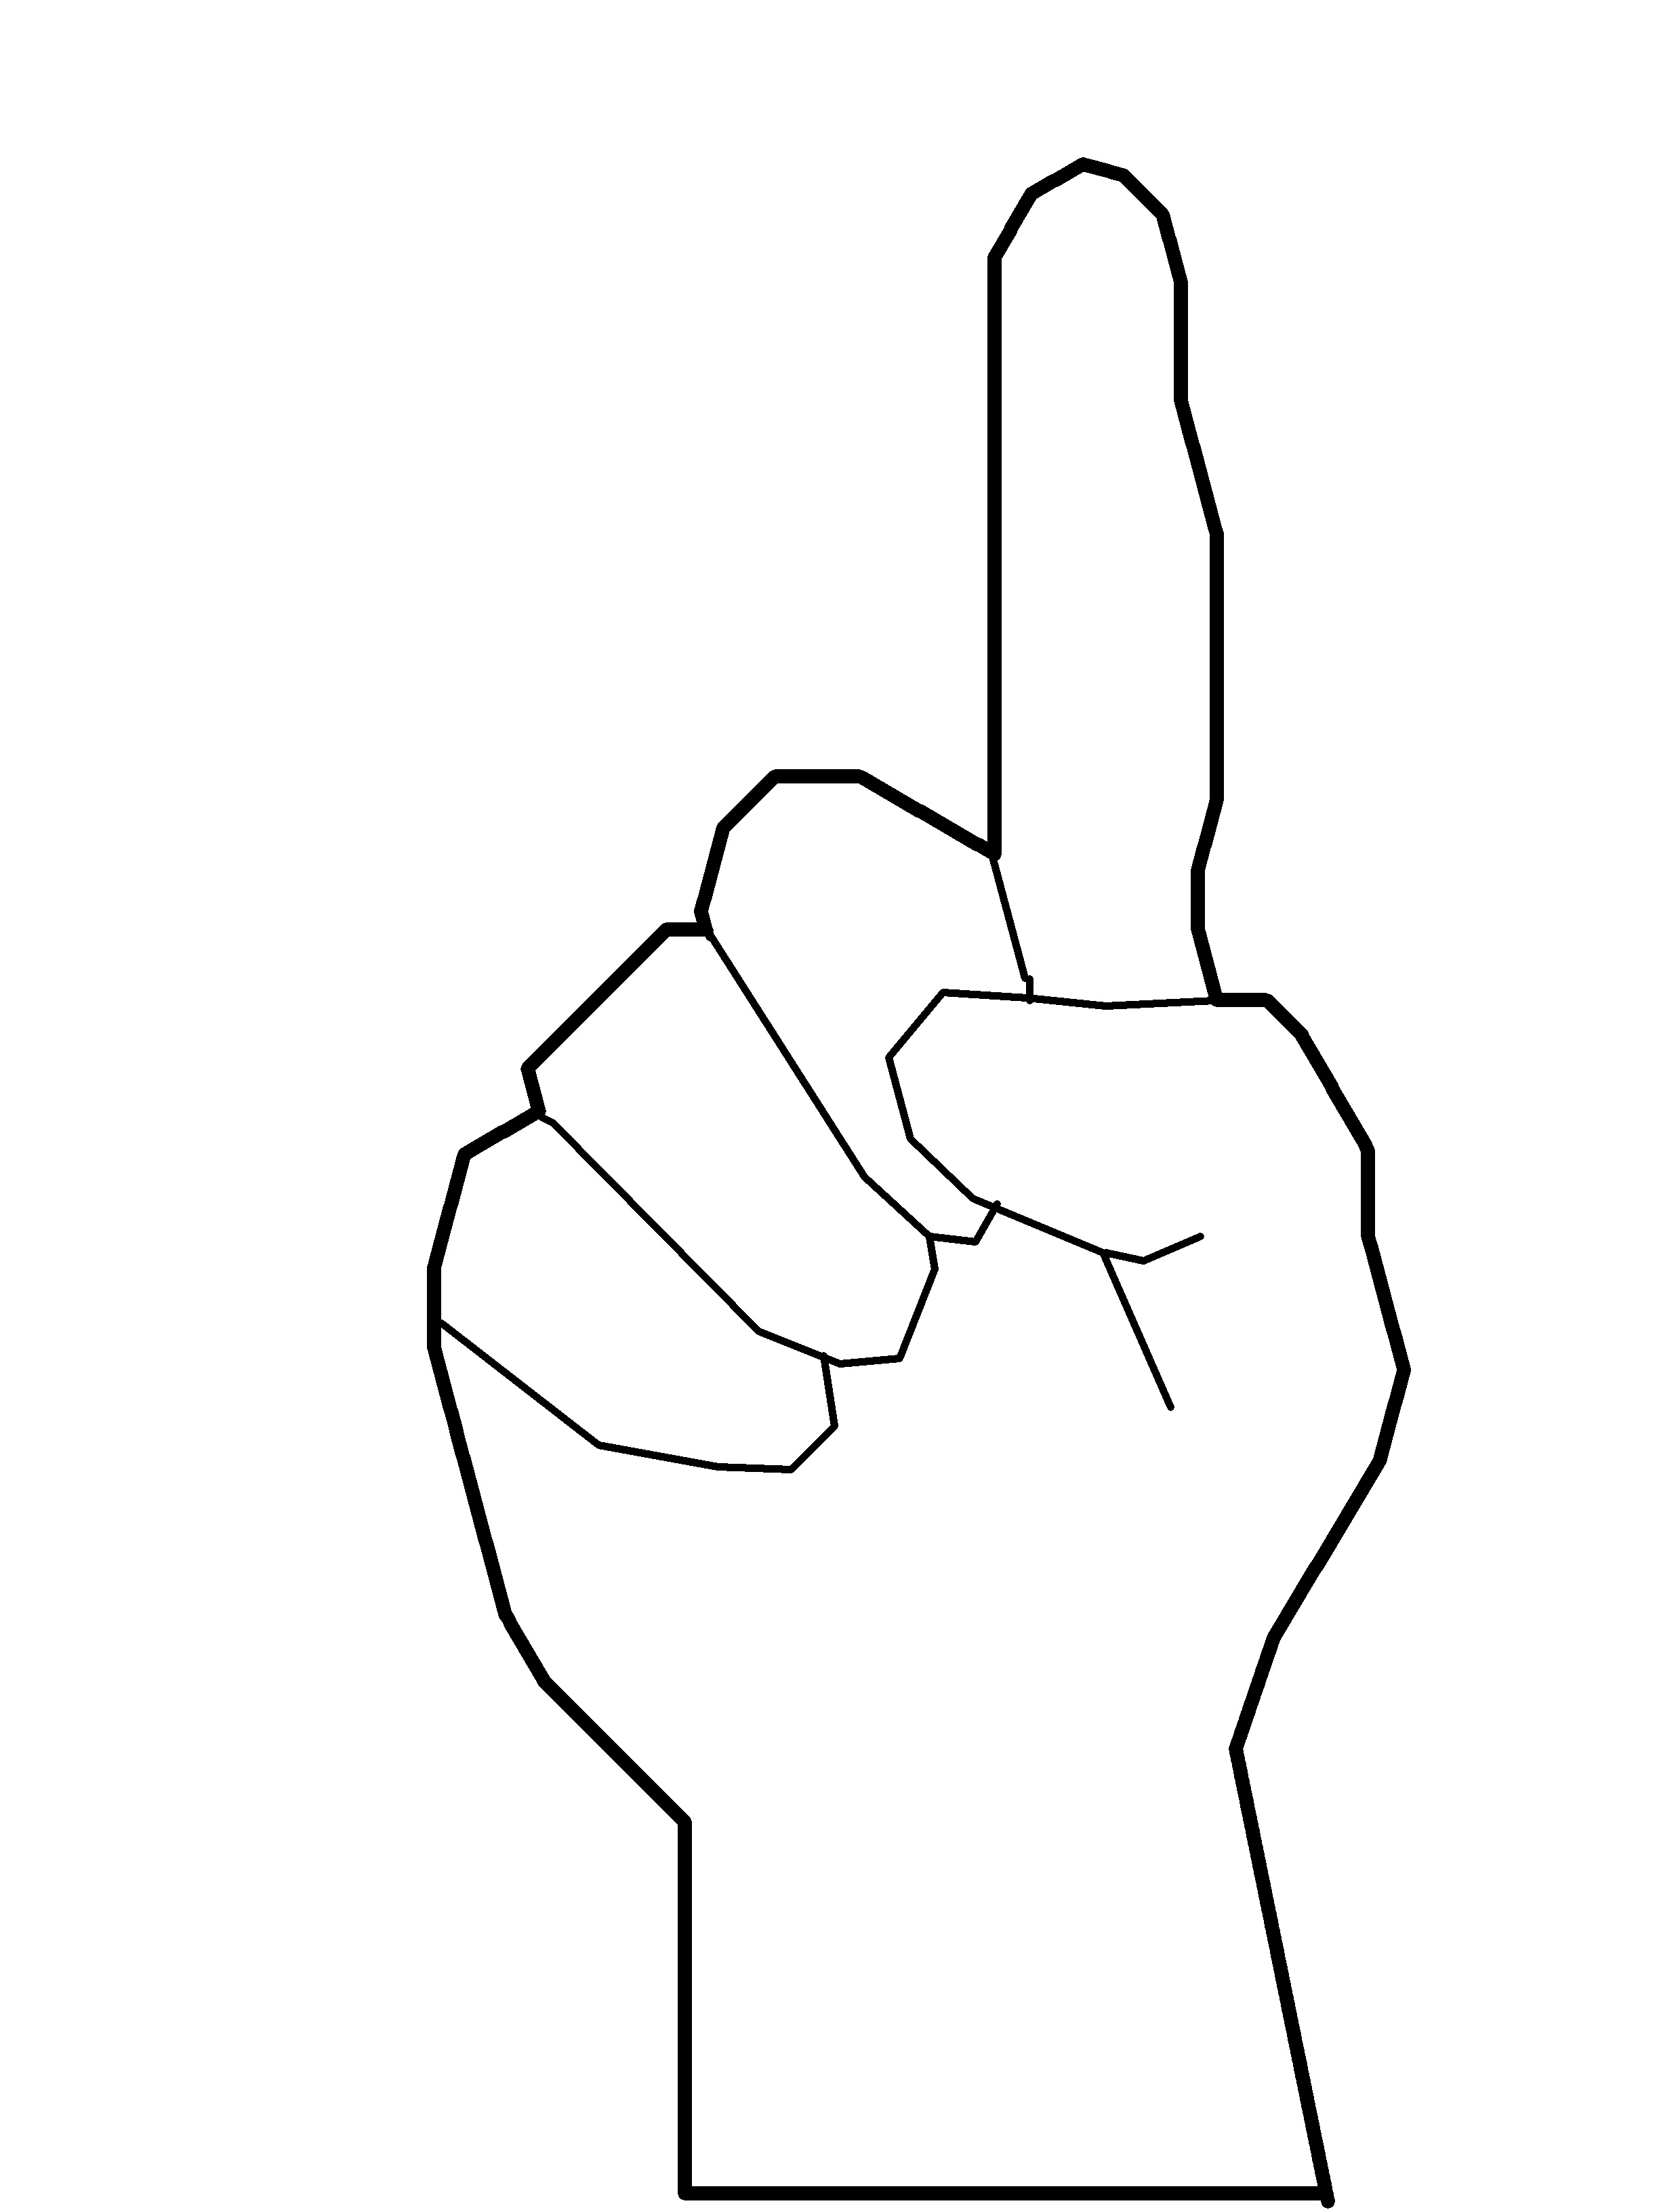 Pointing Finger Drawing at GetDrawings Free download